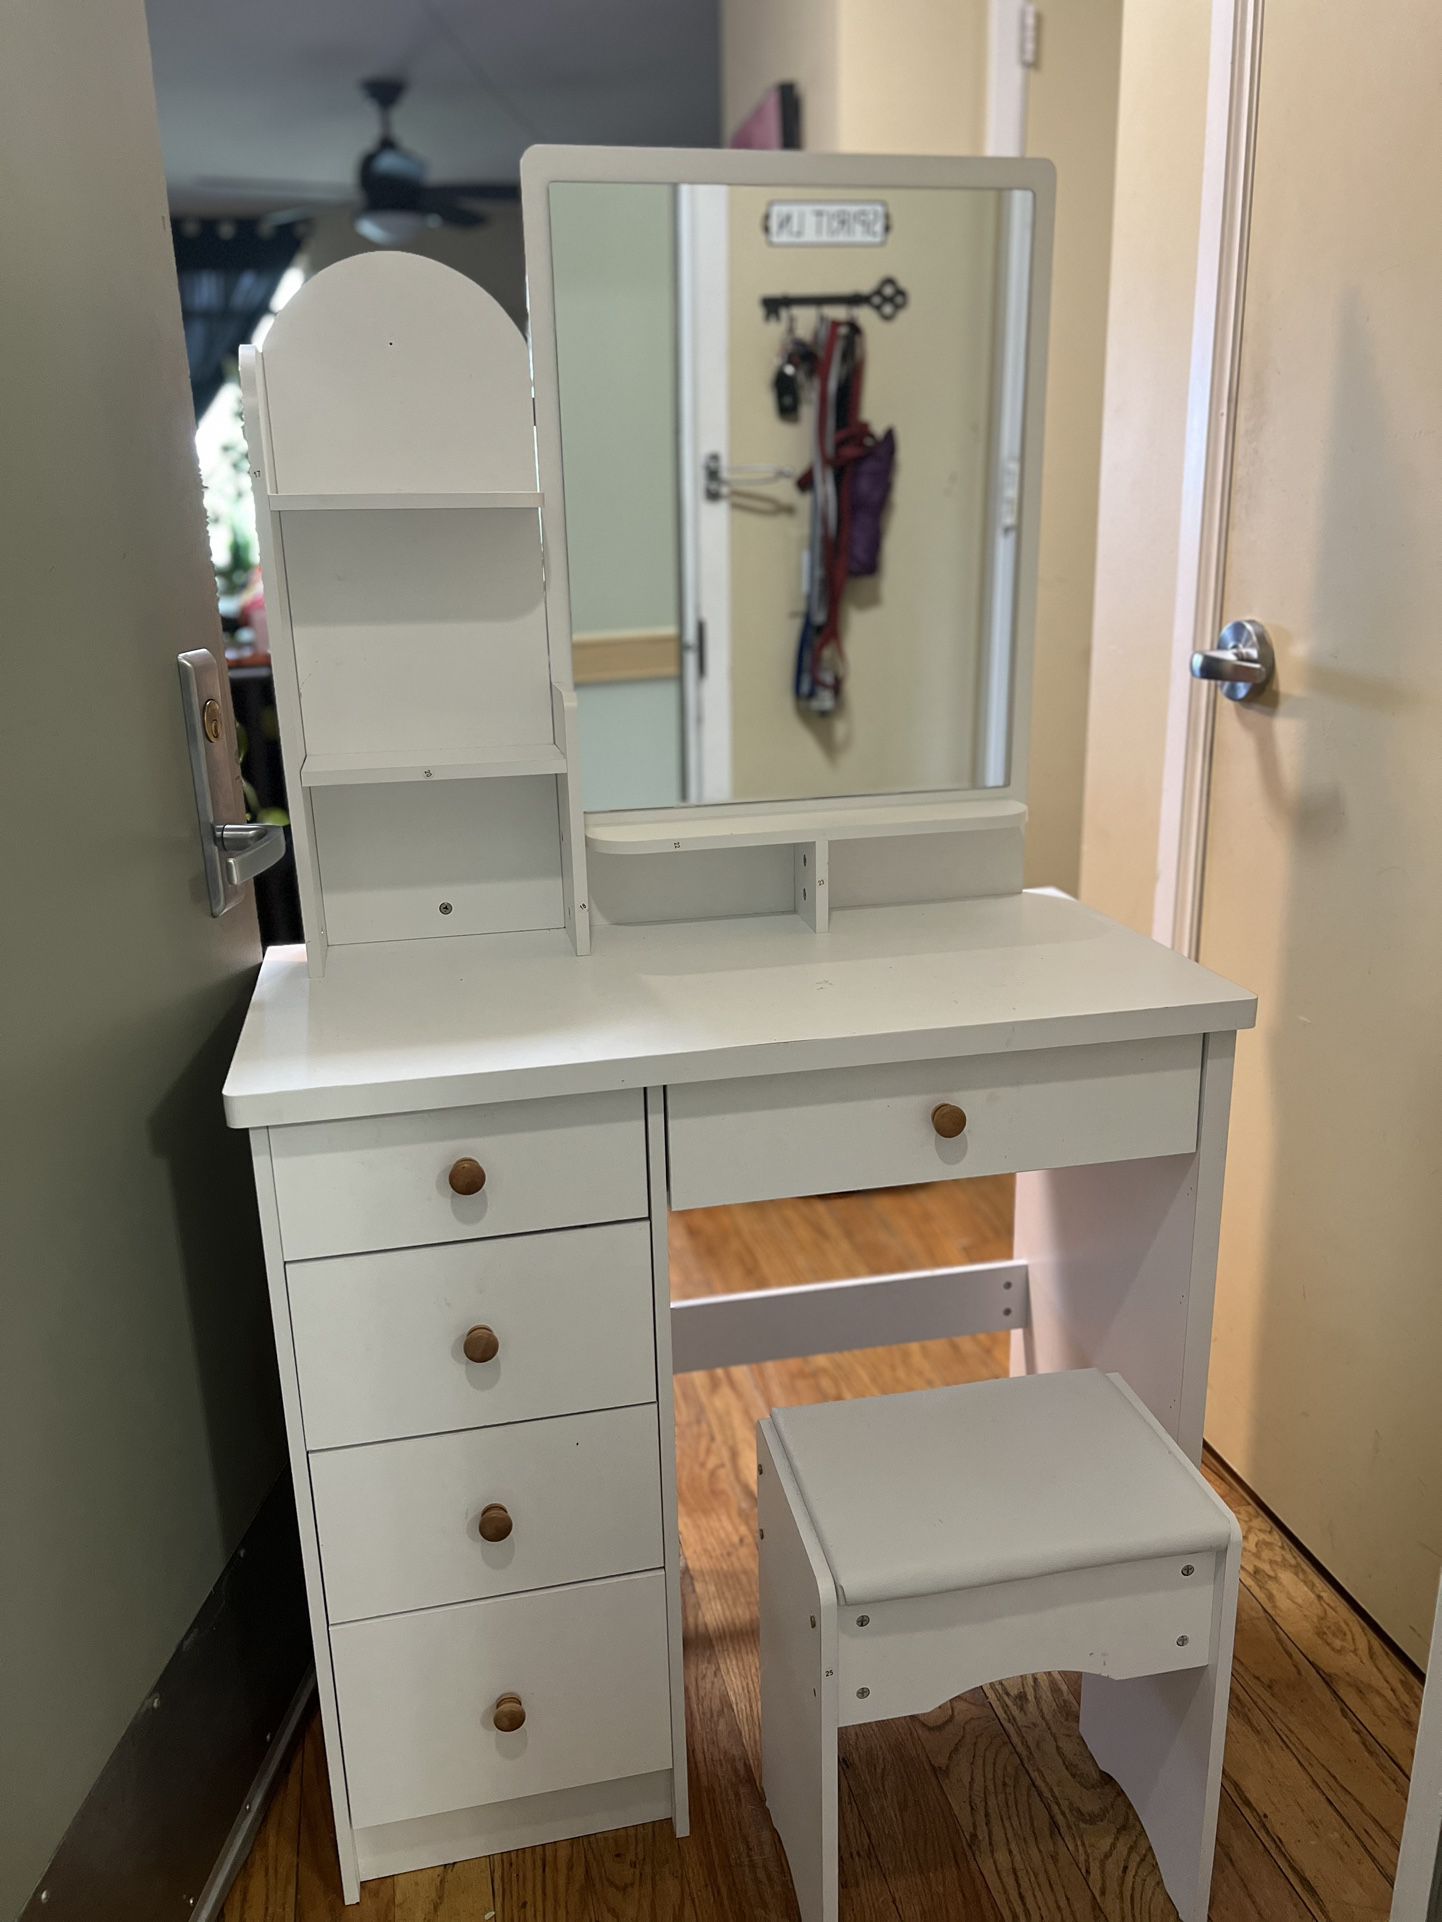 FUFU&GAGA Vanity Set with Mirror, Makeup Vanity Dressing Table with 5 Drawers, Shelves, Dresser Desk and Cushioned Stool Set (White)